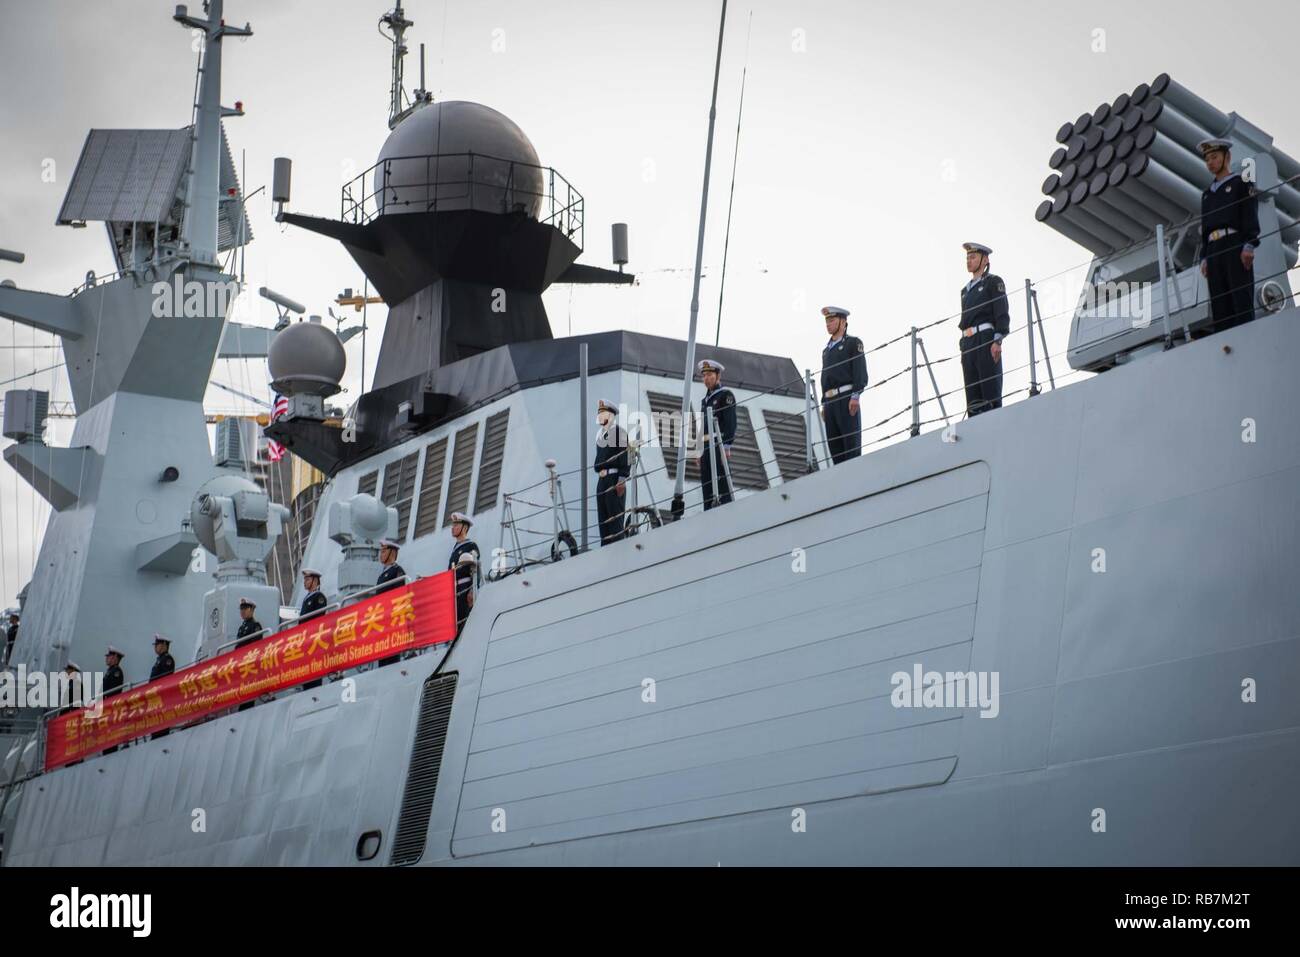 SAN DIEGO (Dec. 6, 2016) Chinese sailors on the Jiangkai II-class frigate Yancheng (FFG 546) man the rails as they arrive in San Diego. Rear Adm. Jay Bynum, commander of Carrier Strike Group Nine, is hosting three People’s Liberation Army ships during a routine port visit in San Diego. Stock Photo